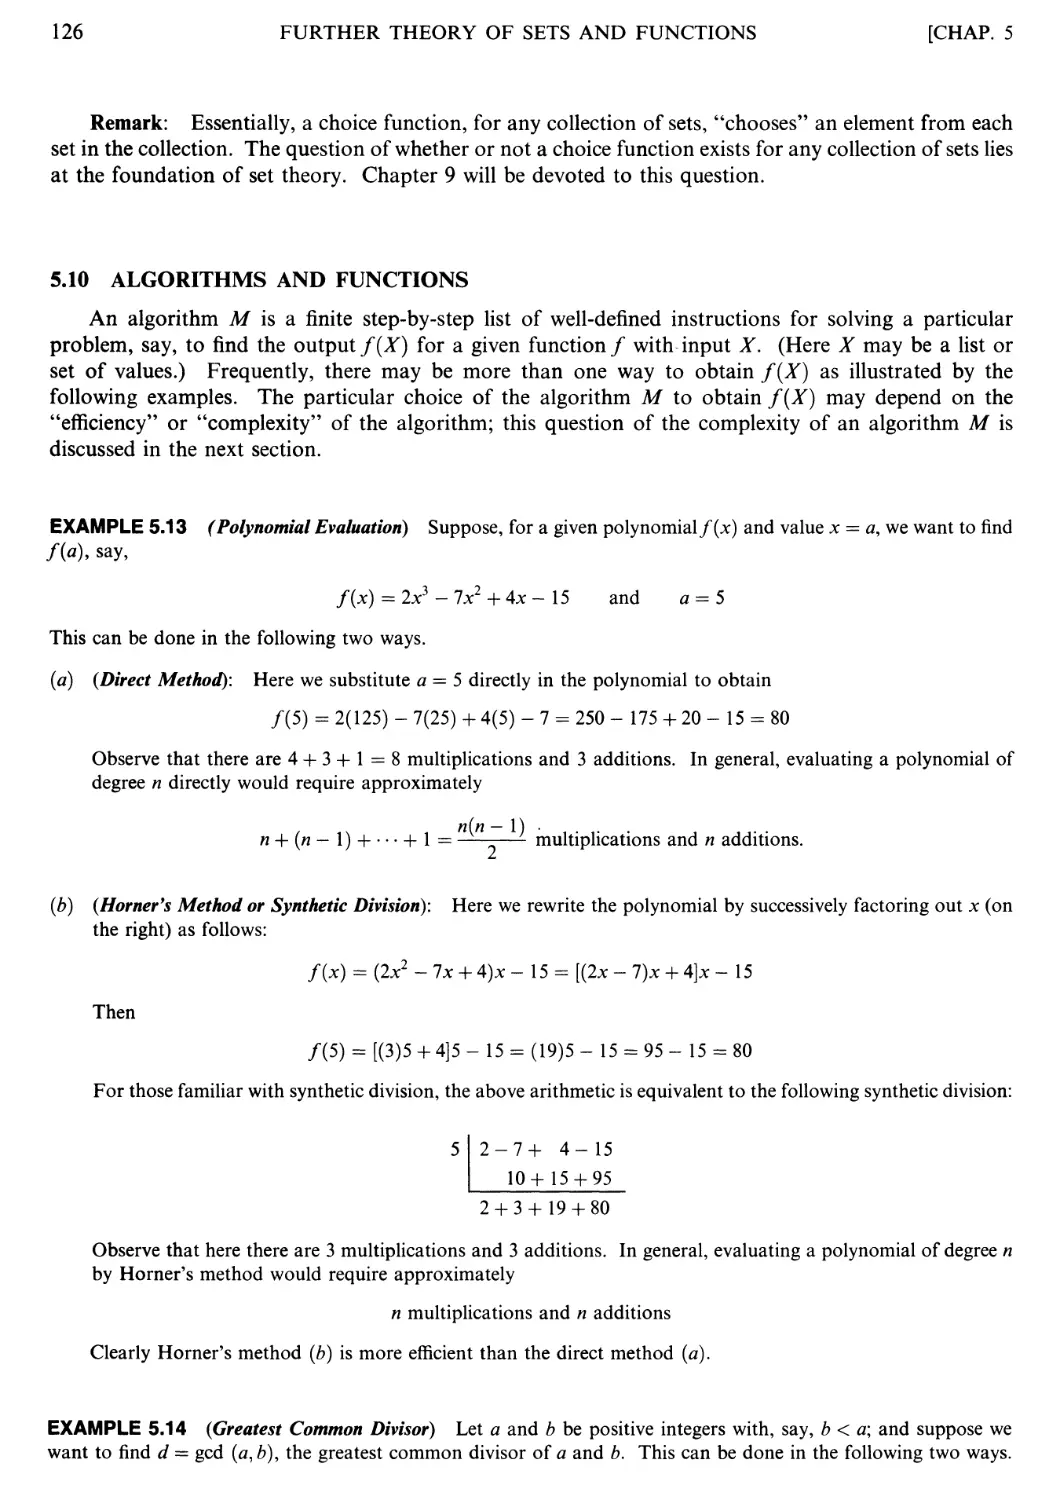 5.10 Algorithms and functions